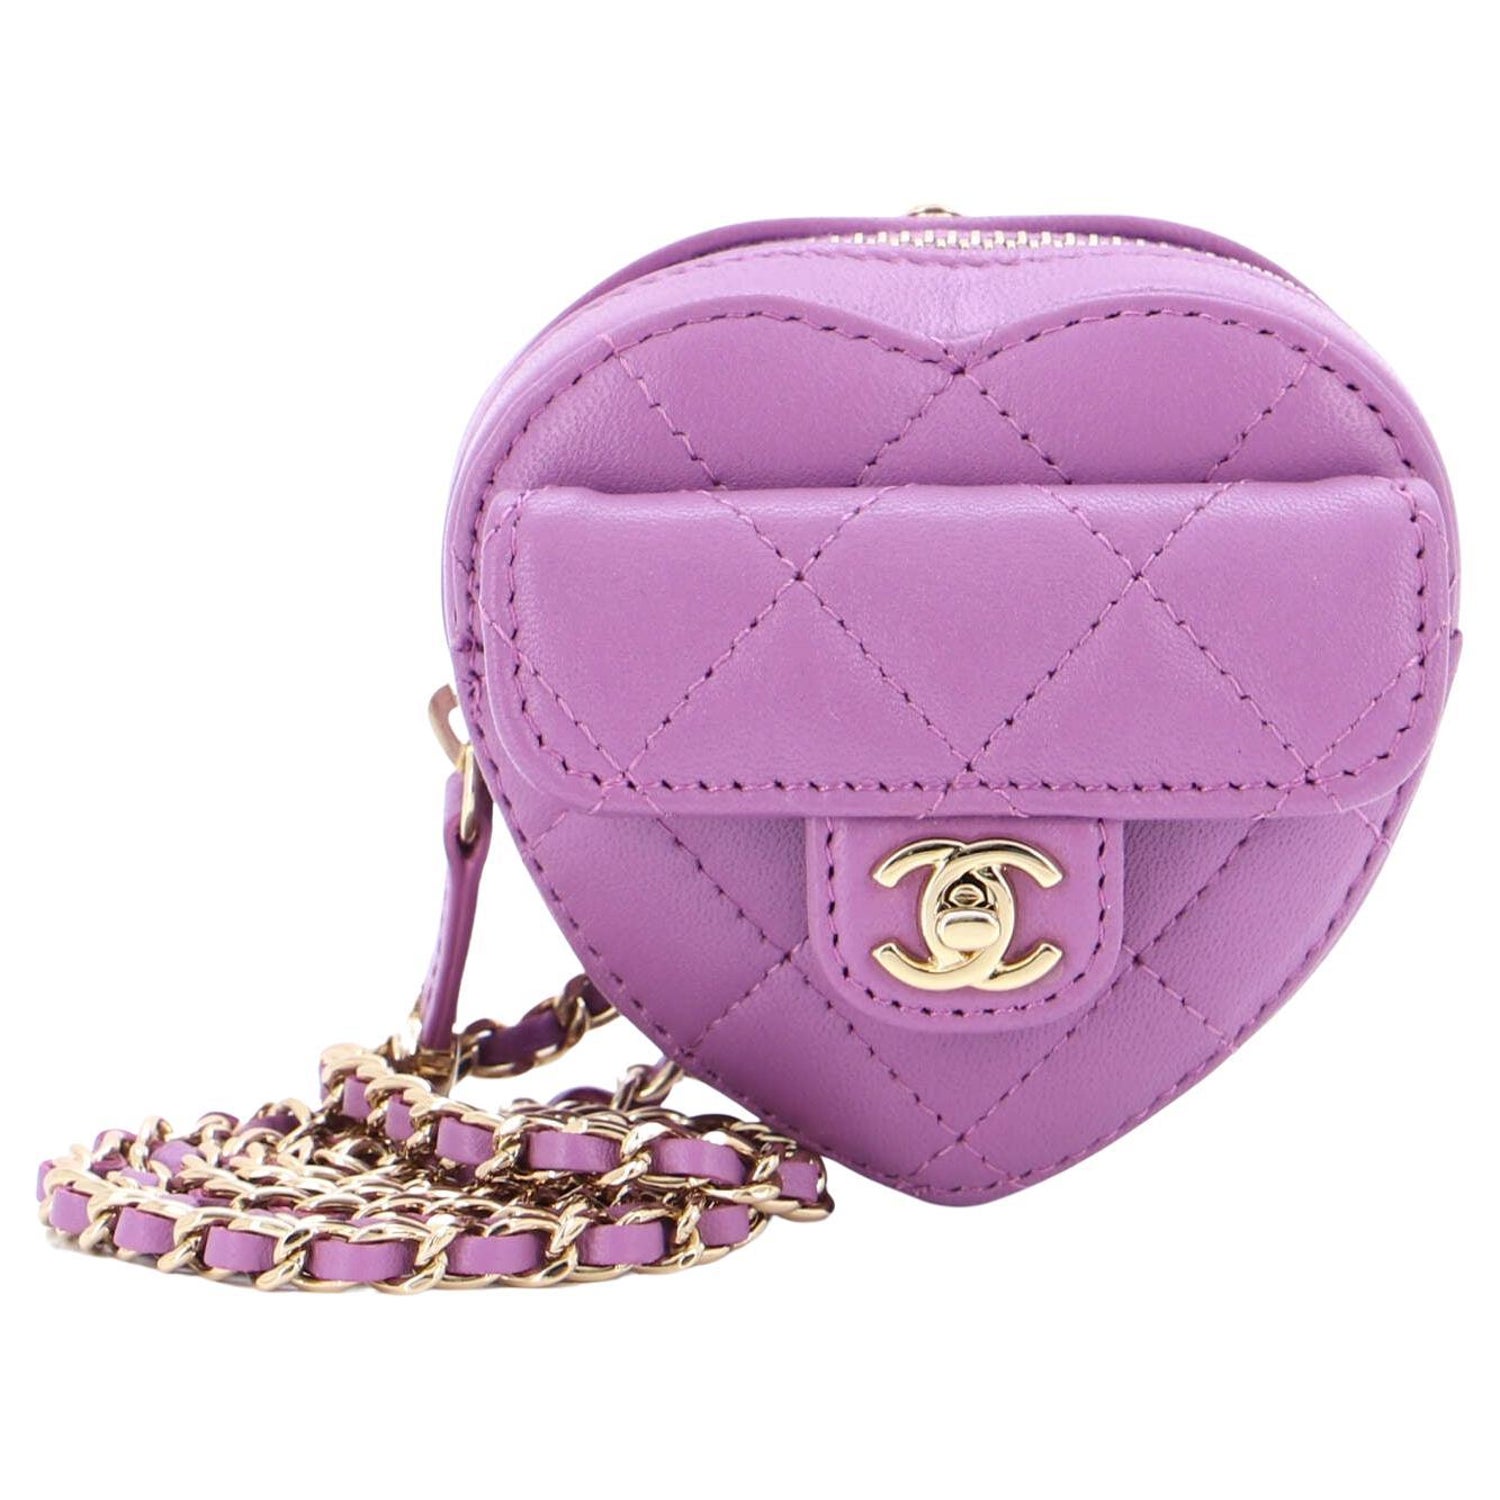 Chanel Small Heart Bag - 4 For Sale on 1stDibs